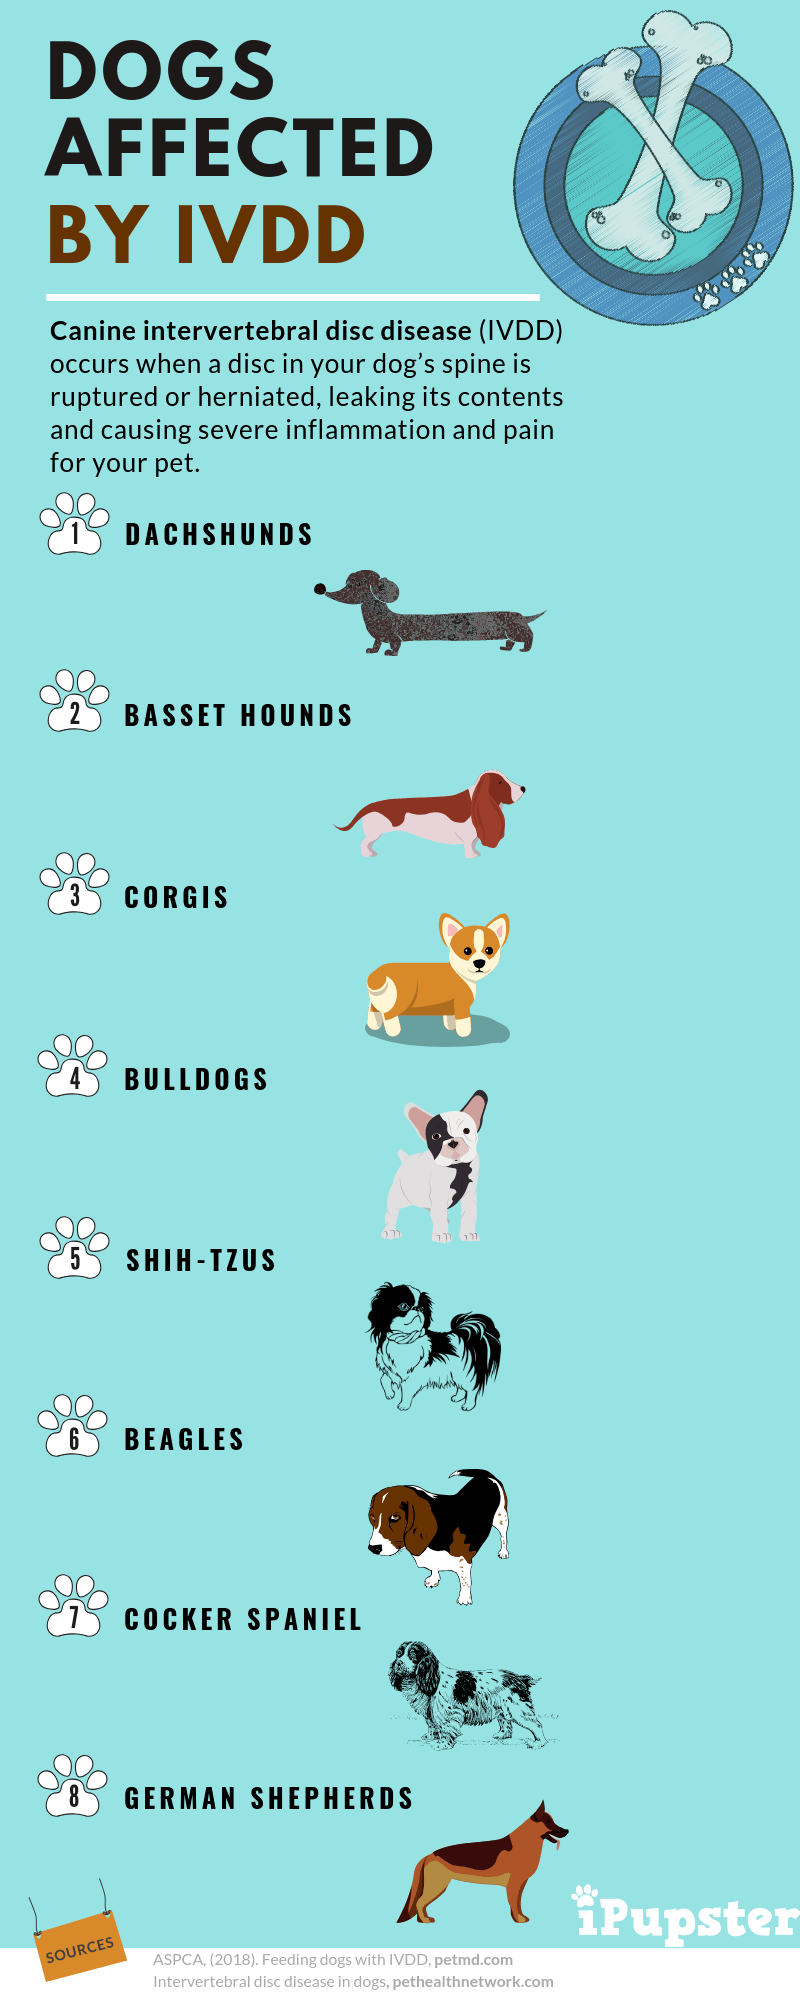 Infographic showing IVDD in dogs like Dachshunds, Beagles, Bulldogs